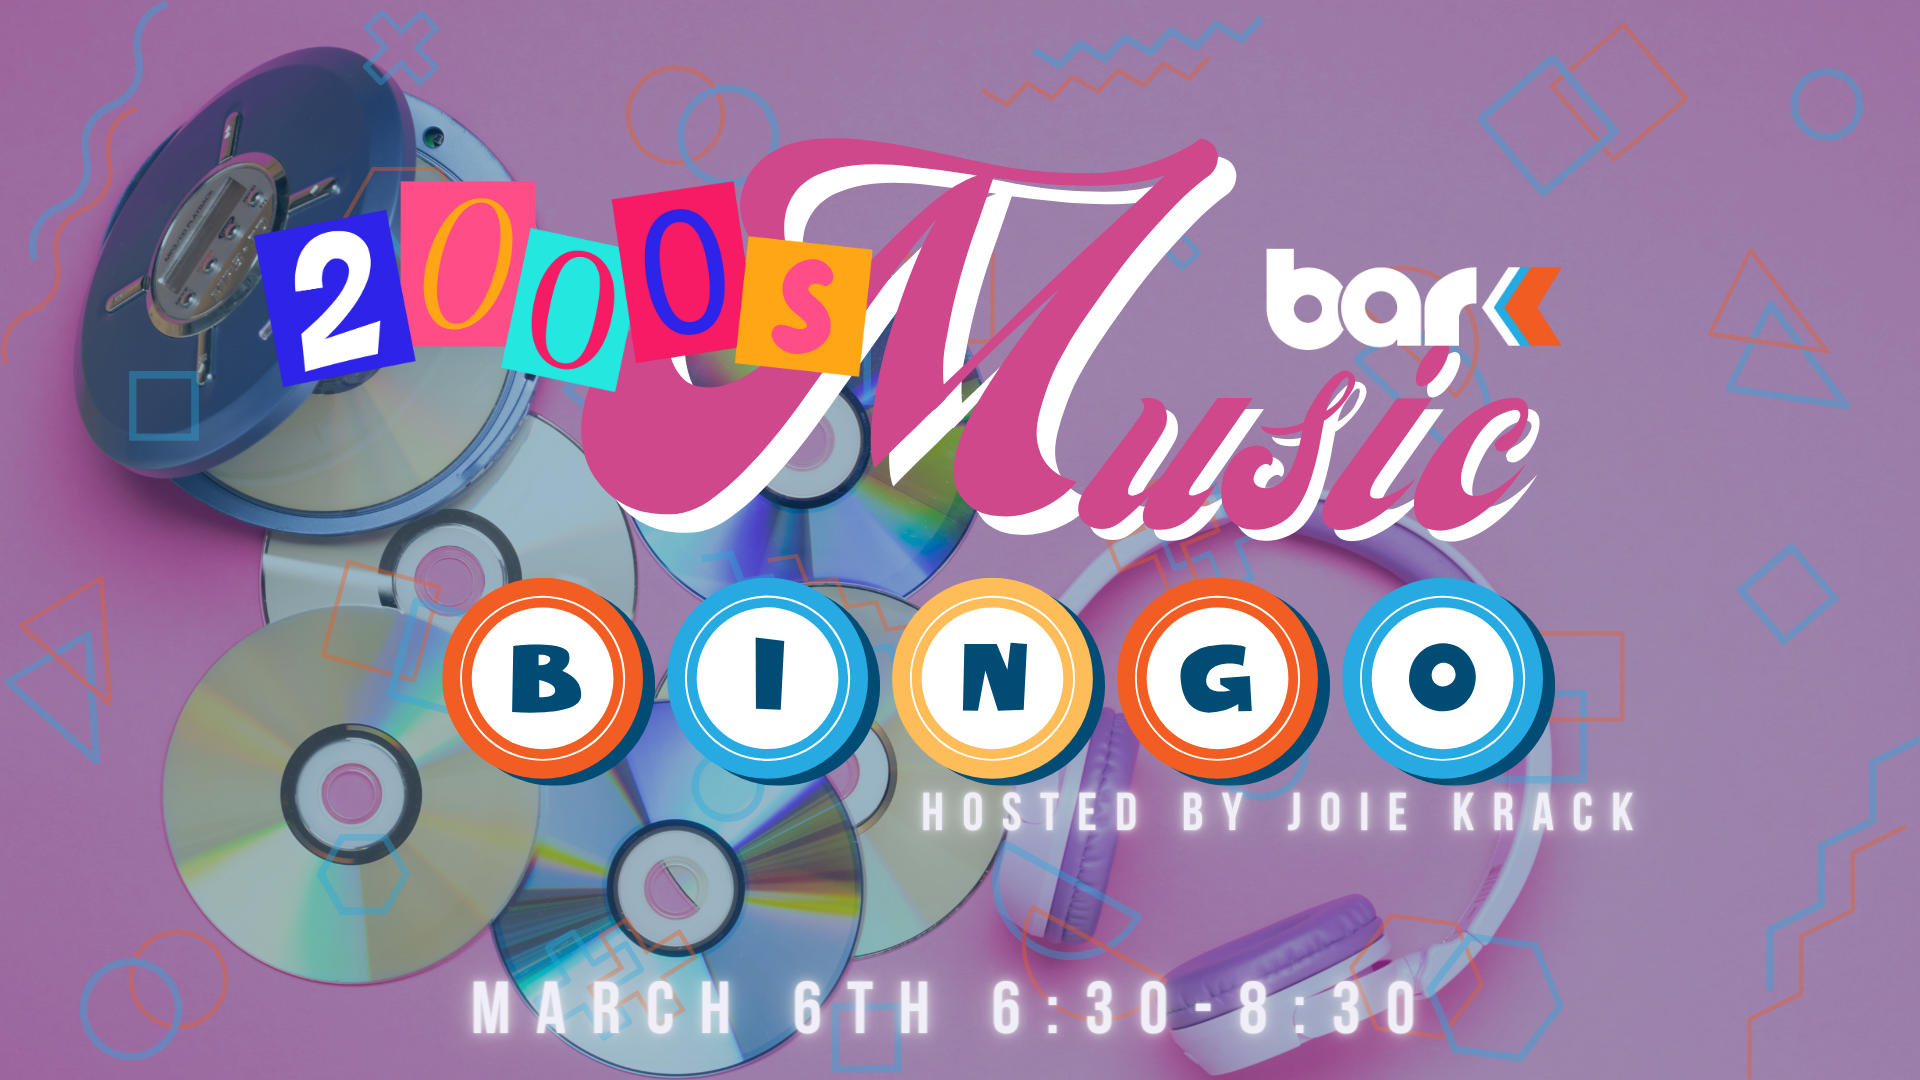 2000's music bingo hosted by Joie Krack at Bar K. March 6th 6:30 to 8:30.